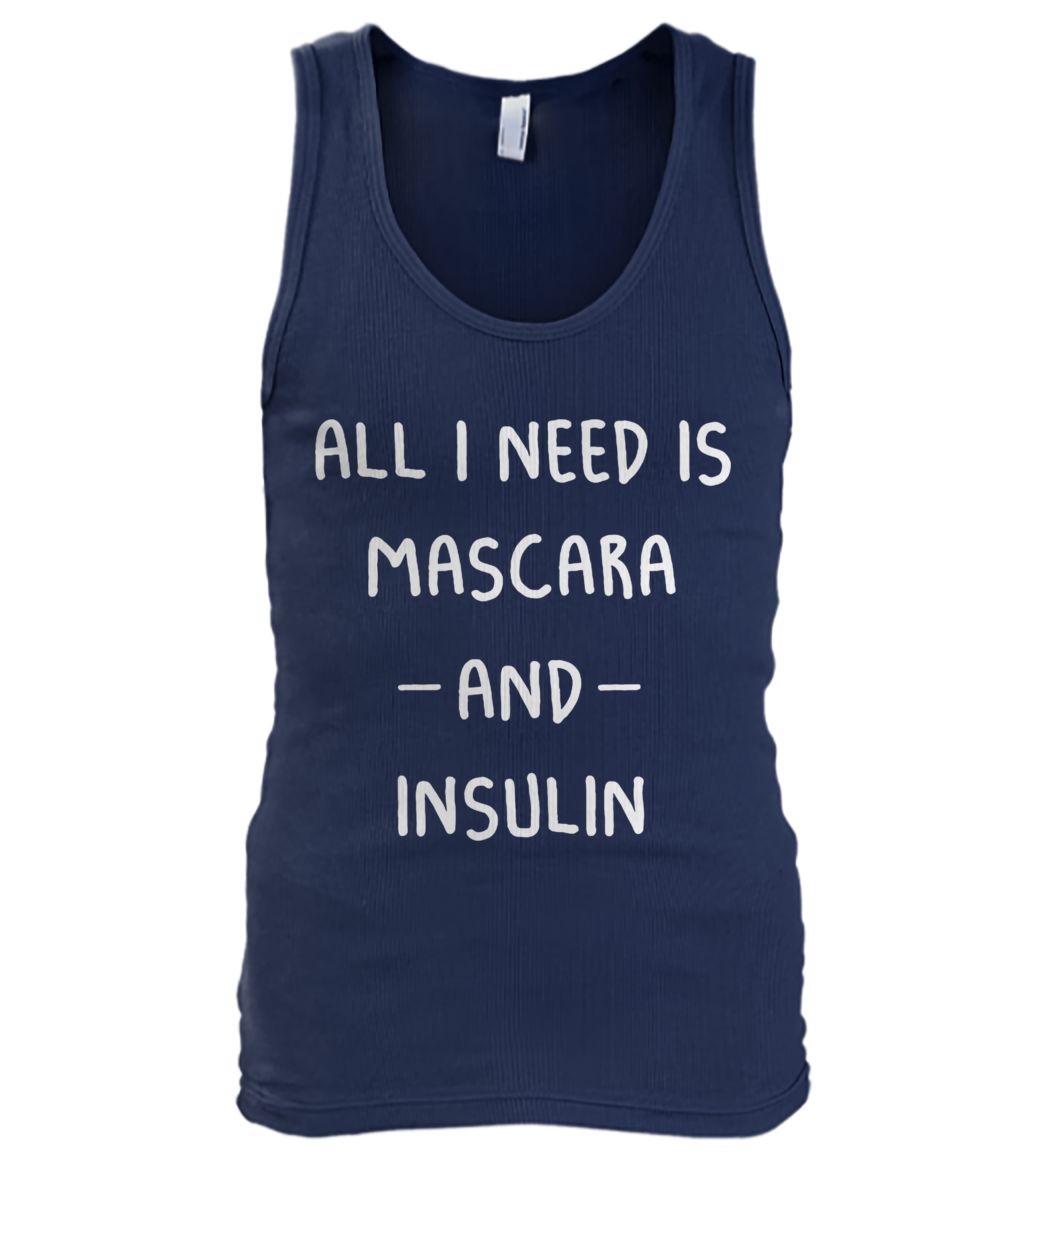 All I need is mascara and insulin men's tank top